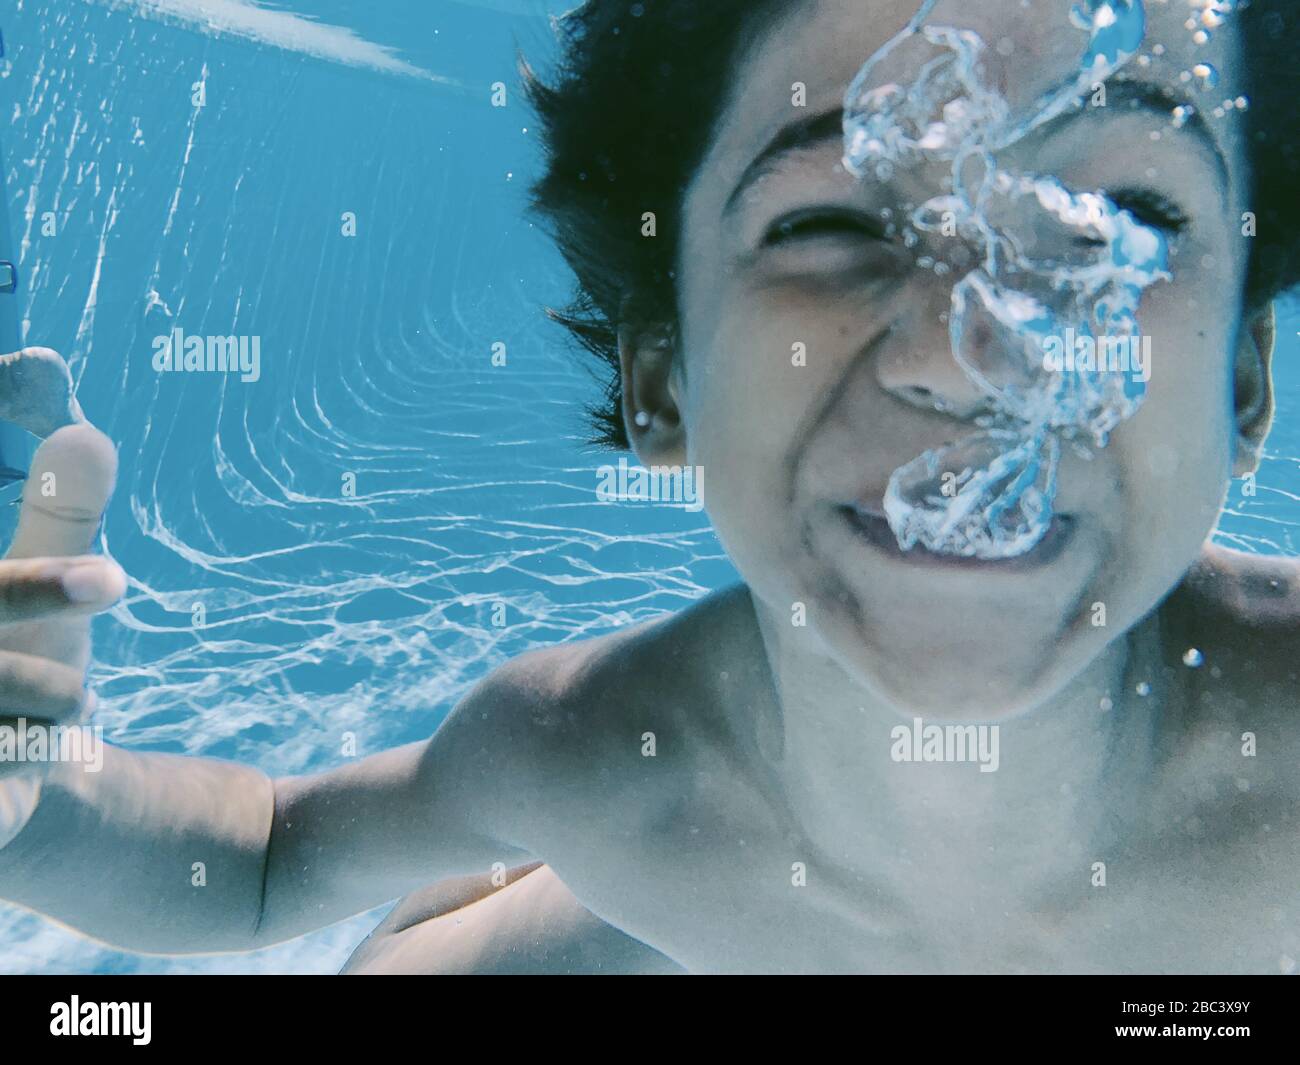 Underwater view of kid playing in a swimming pool